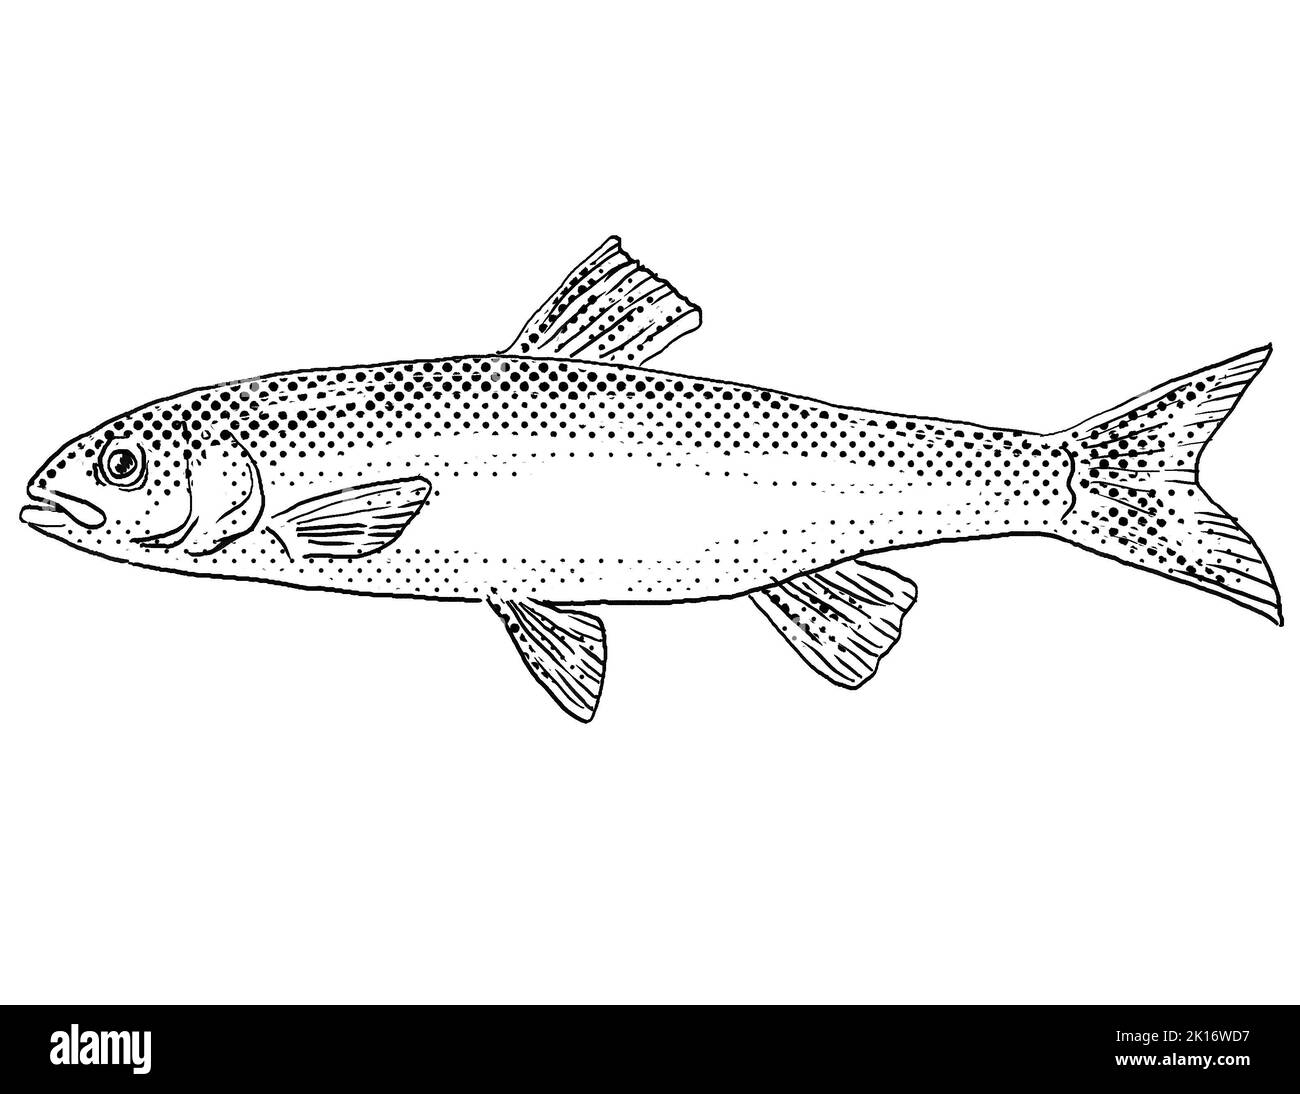 Cartoon style line drawing of a fallfish or Semotilus corporalis freshwater fish endemic to North America with halftone dots shading on isolated backg Stock Photo